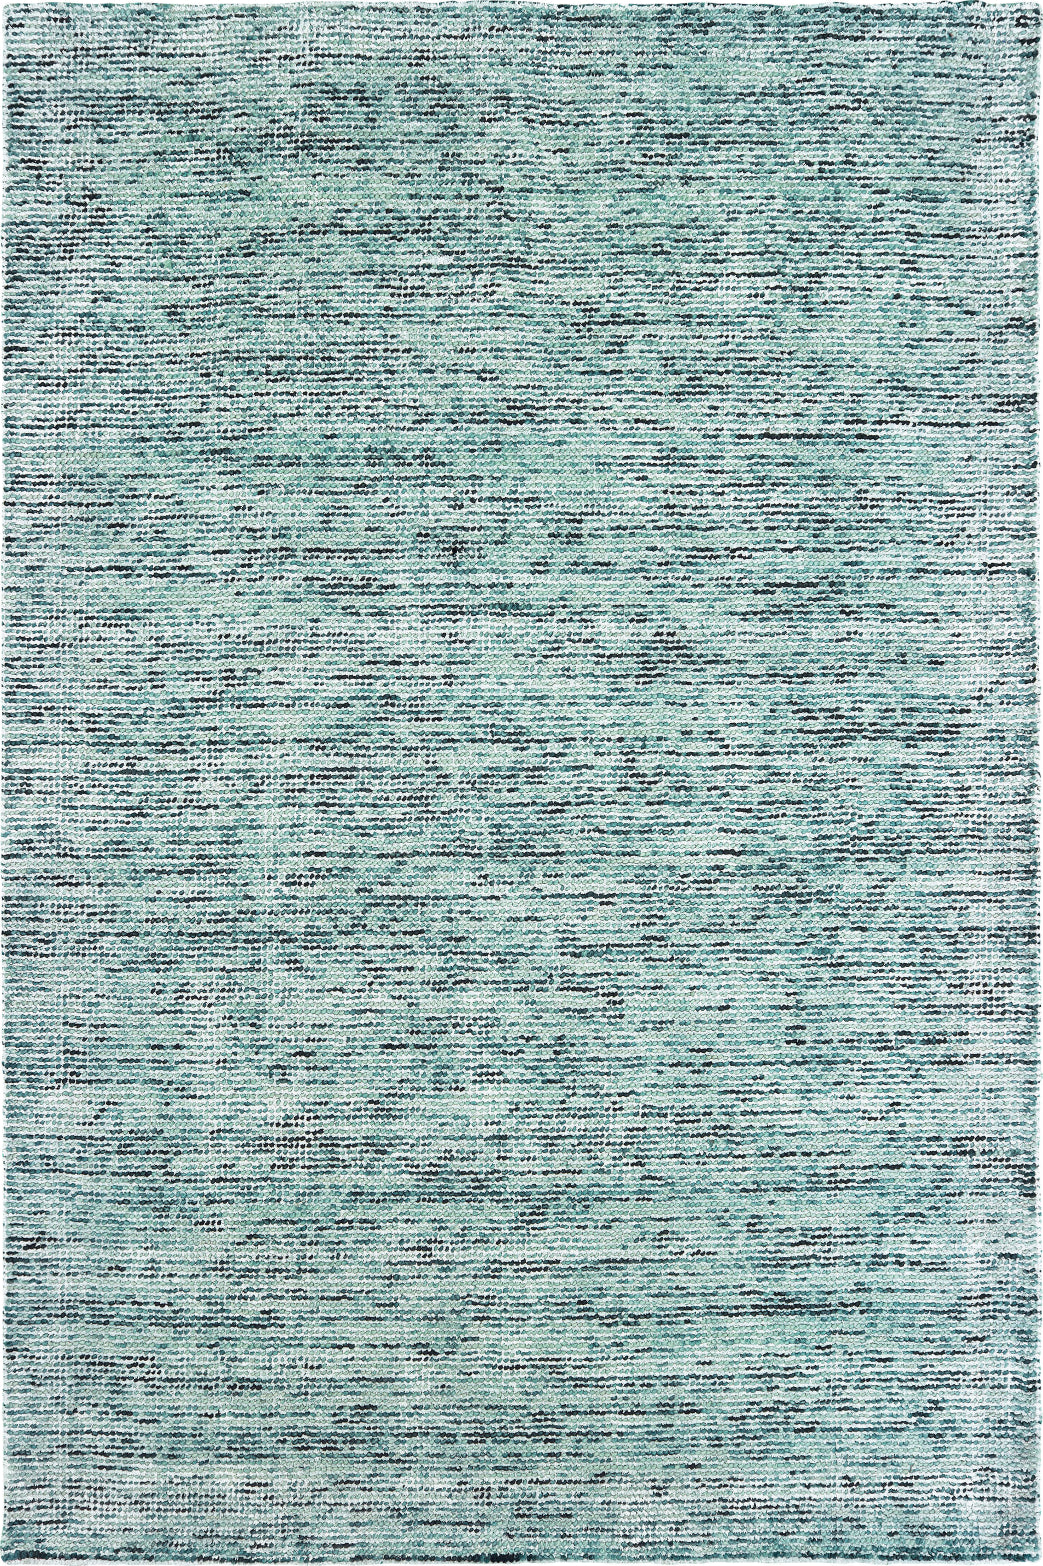 Tommy Bahama Lucent 45901 Blue Teal Area Rug main image